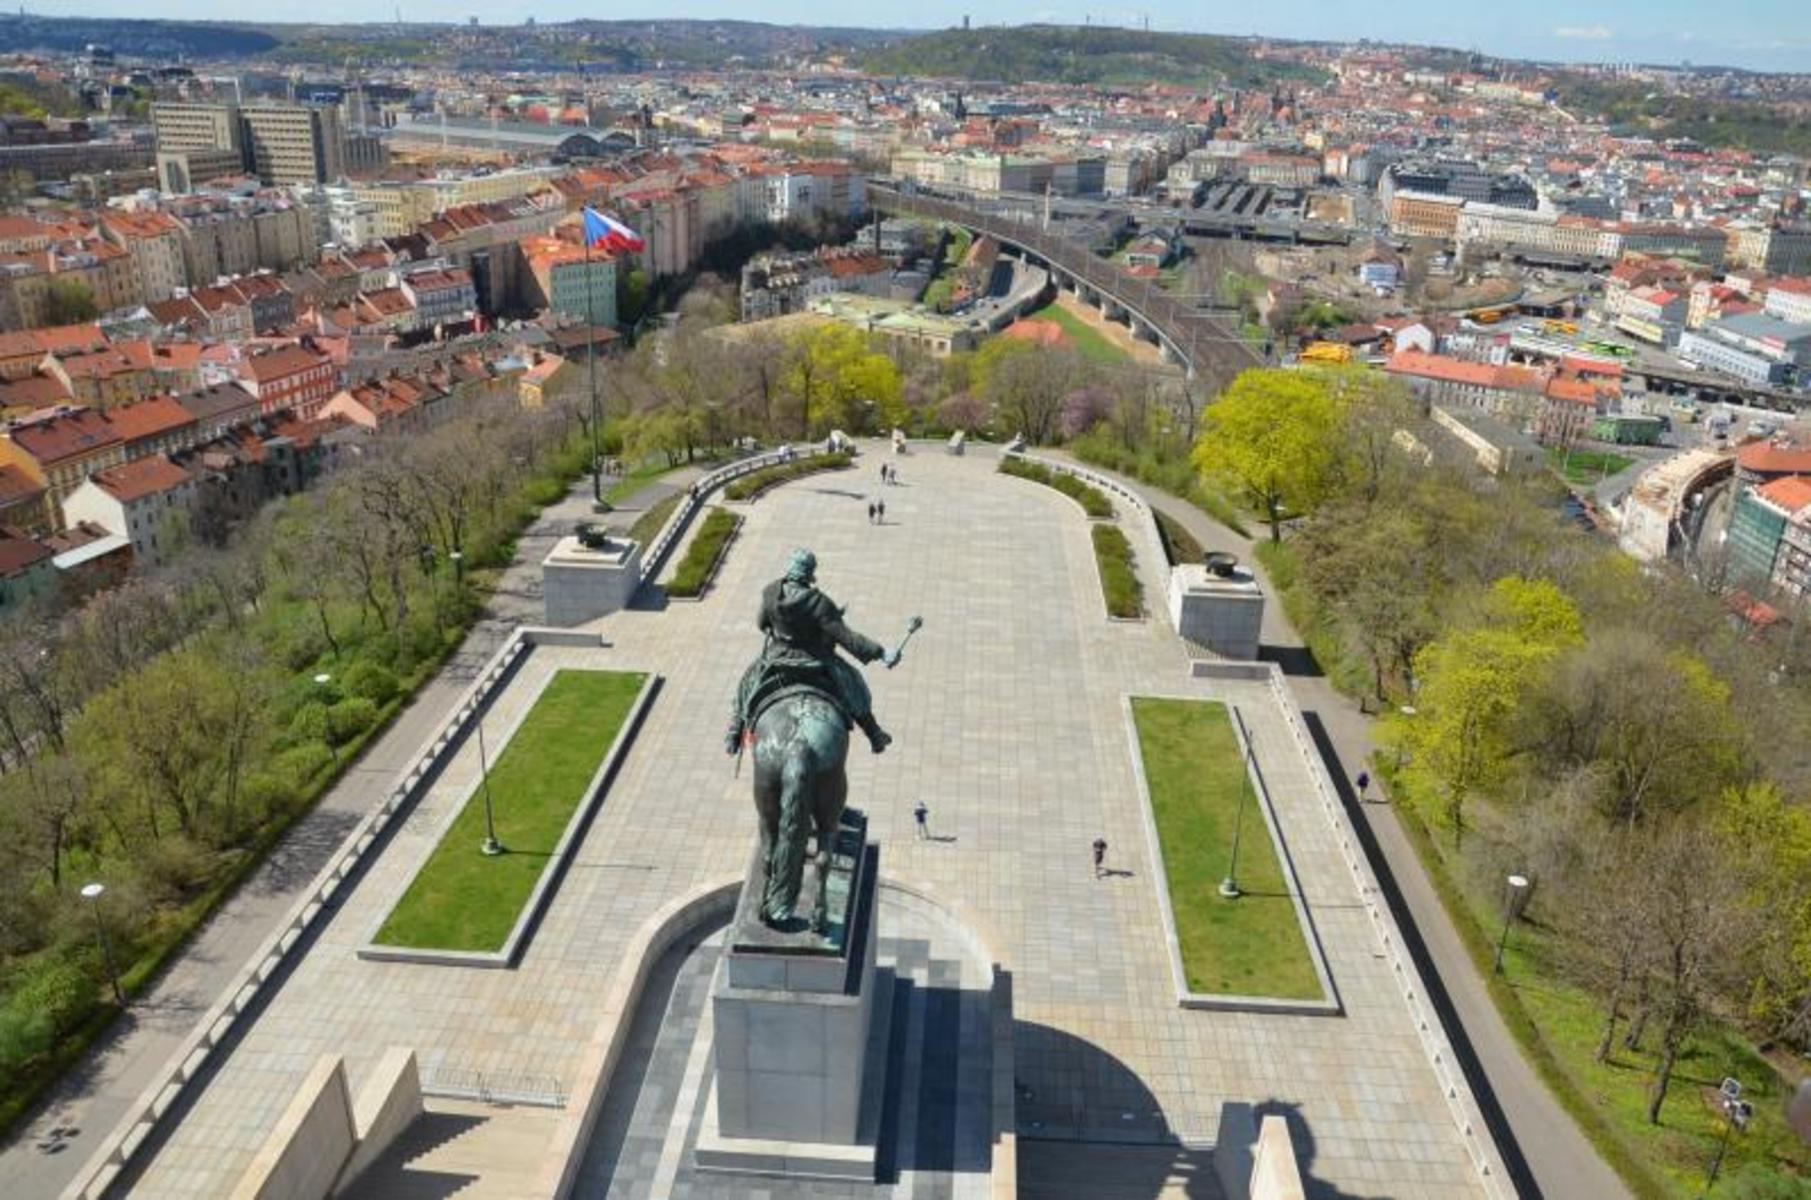 National monument of Czech Republic - National Memorial on Vítkov Hill